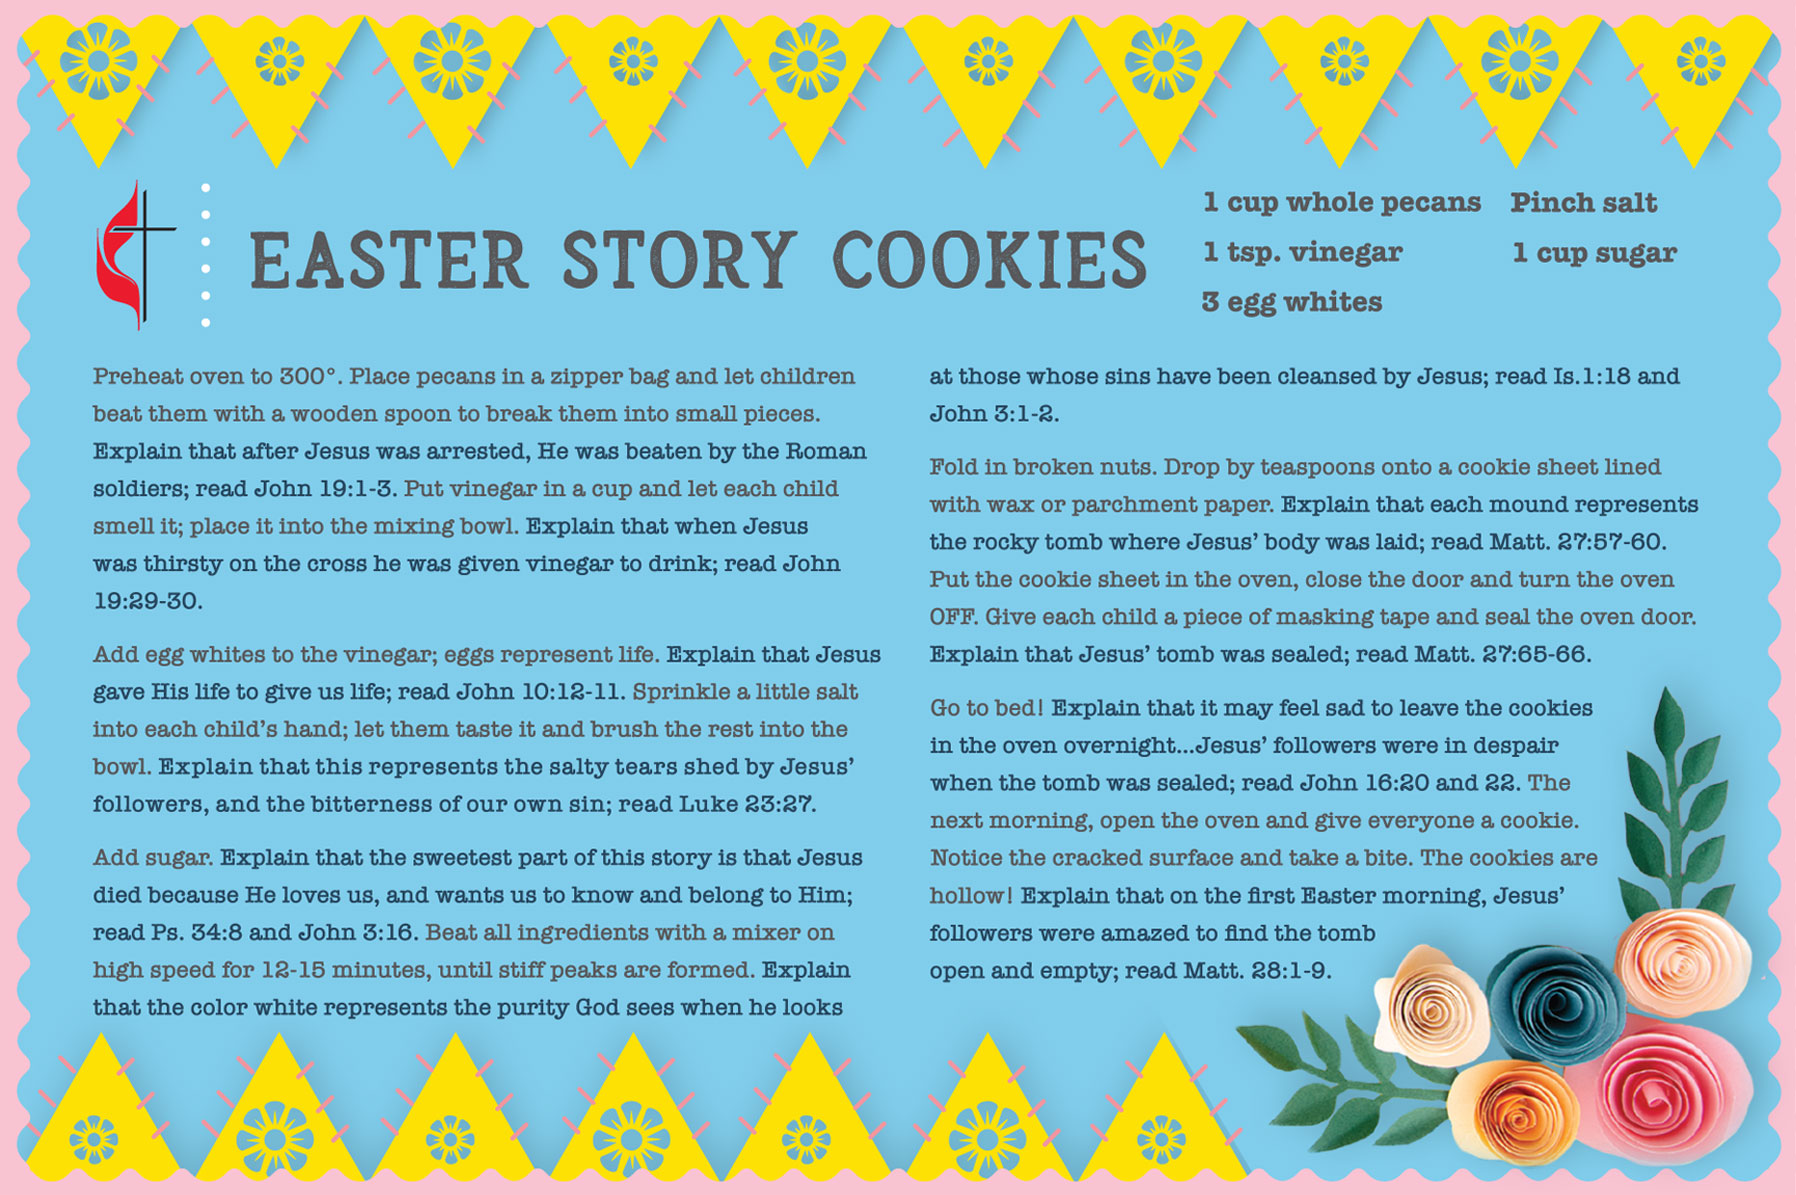 The Easter cookie recipe is a good children's activity to tell the story of the Resurrection. Illustration by Sara Schork for United Methodist Communications